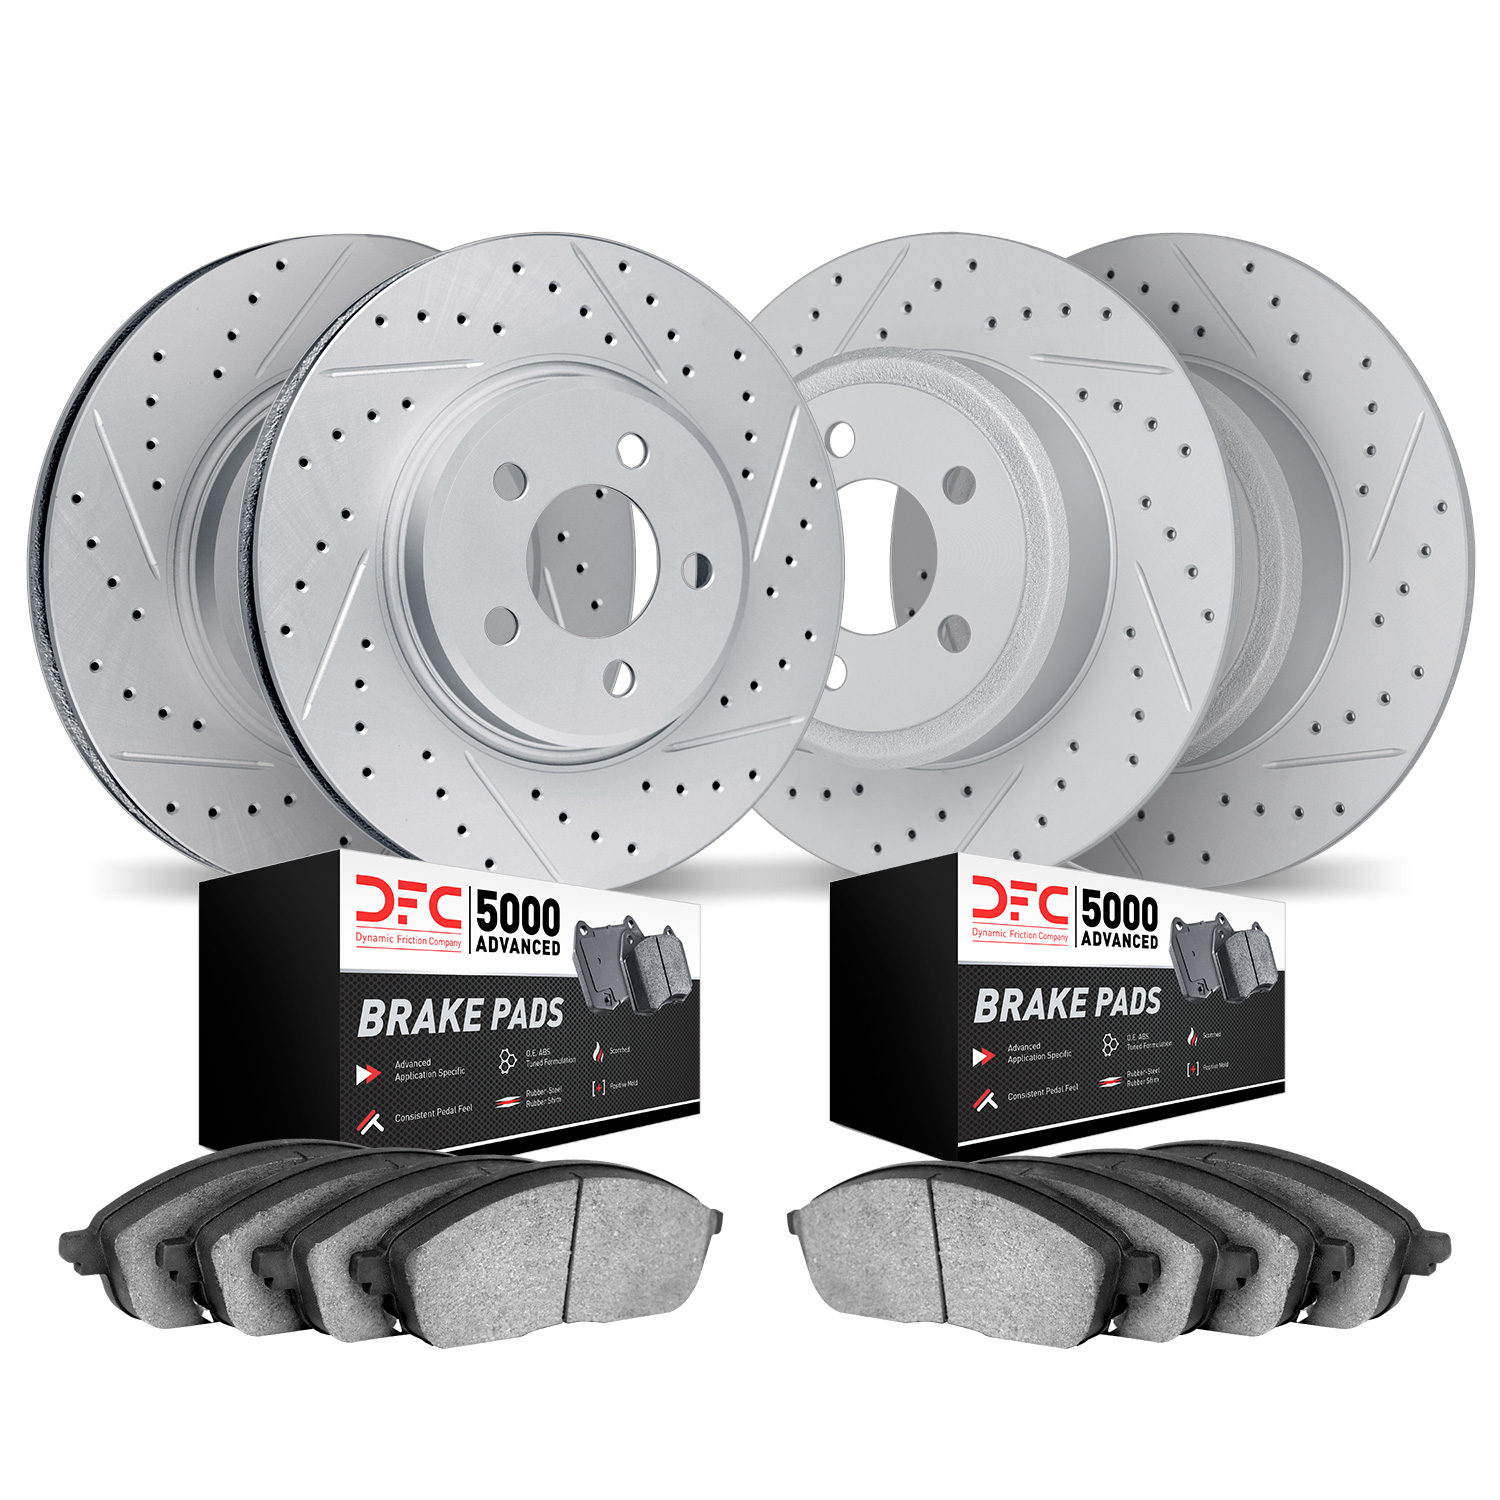 2504-80023 Geoperformance Drilled/Slotted Rotors w/5000 Advanced Brake Pads Kit, 2017-2018 Ford/Lincoln/Mercury/Mazda, Position: